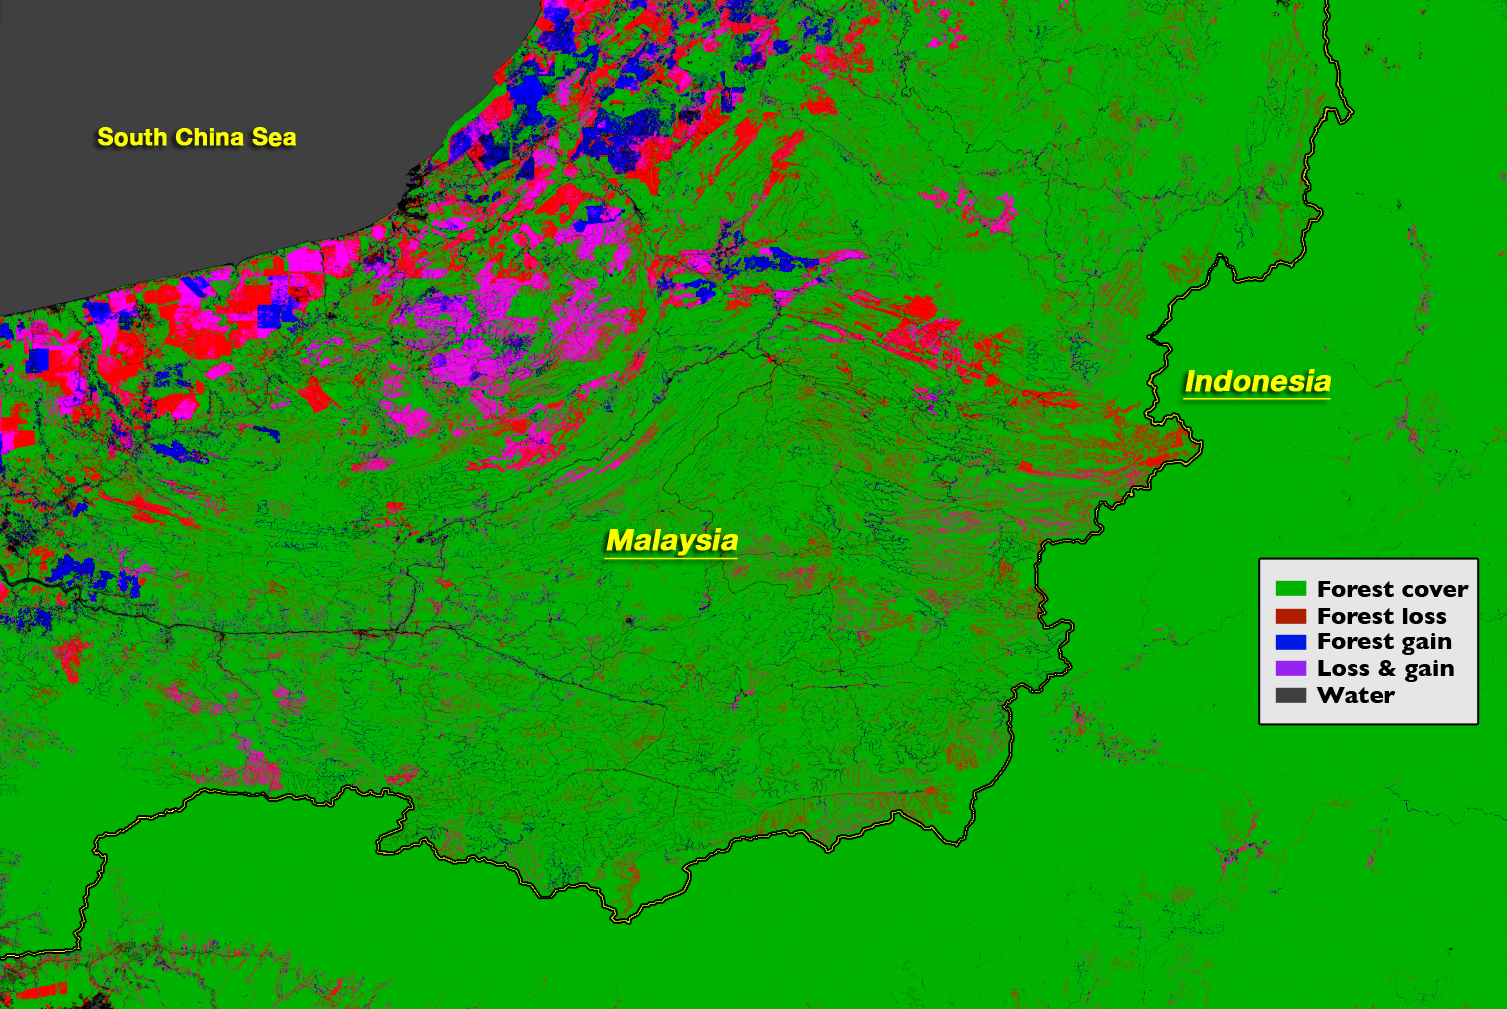 The border between Malaysia and Indonesia on the island of Borneo stands out in the Landsat-based map of forest disturbance. Red pixels represent forest loss between 2000 and 2012. Image Credit: NASA Goddard, based on data from Hansen et al., 2013.